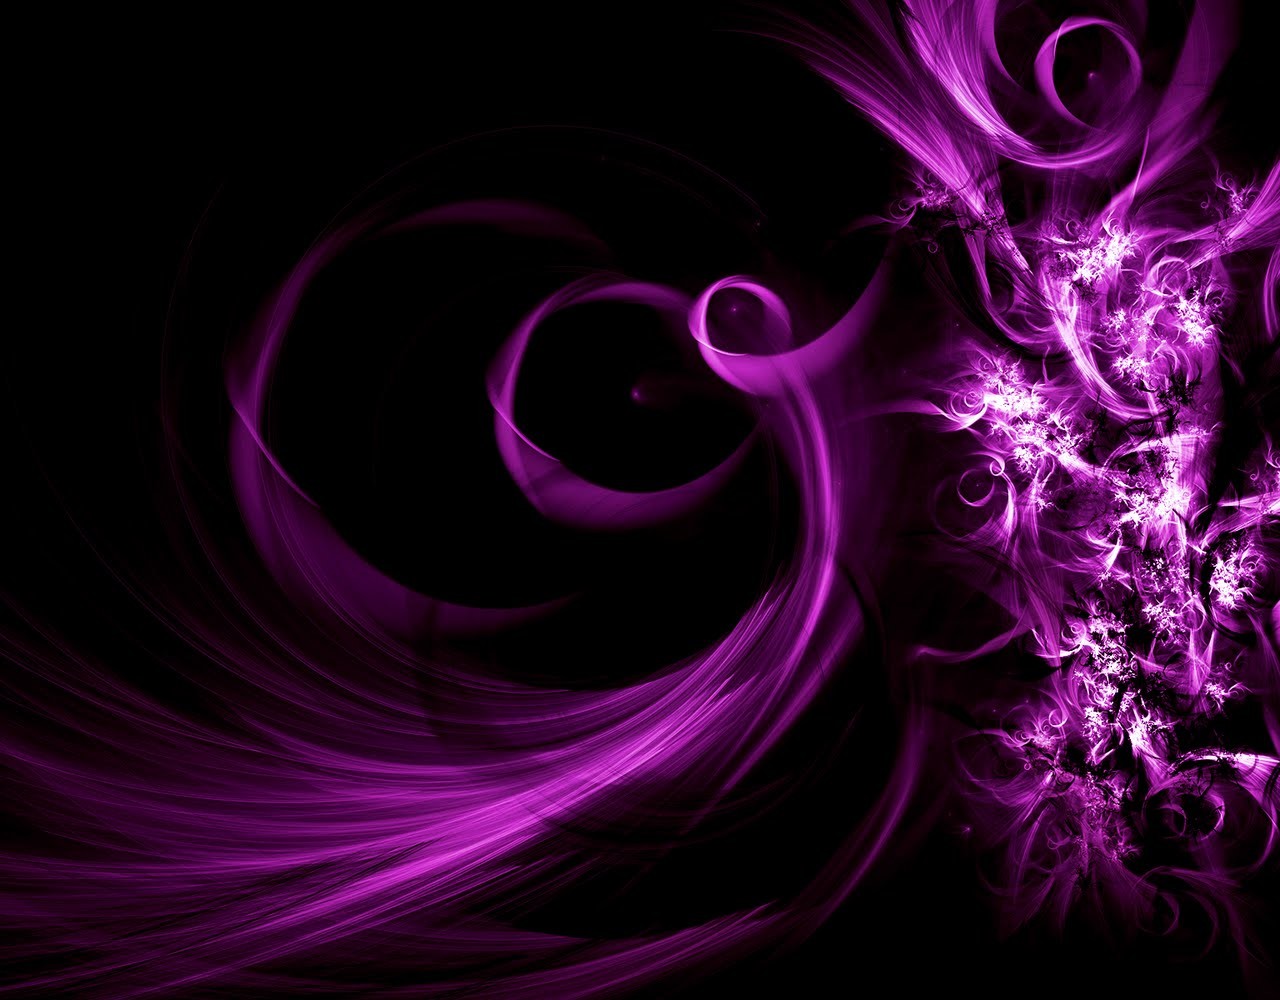 Go Launcher Purple Theme Android Apps On Google Play - Abstract Backgrounds - HD Wallpaper 